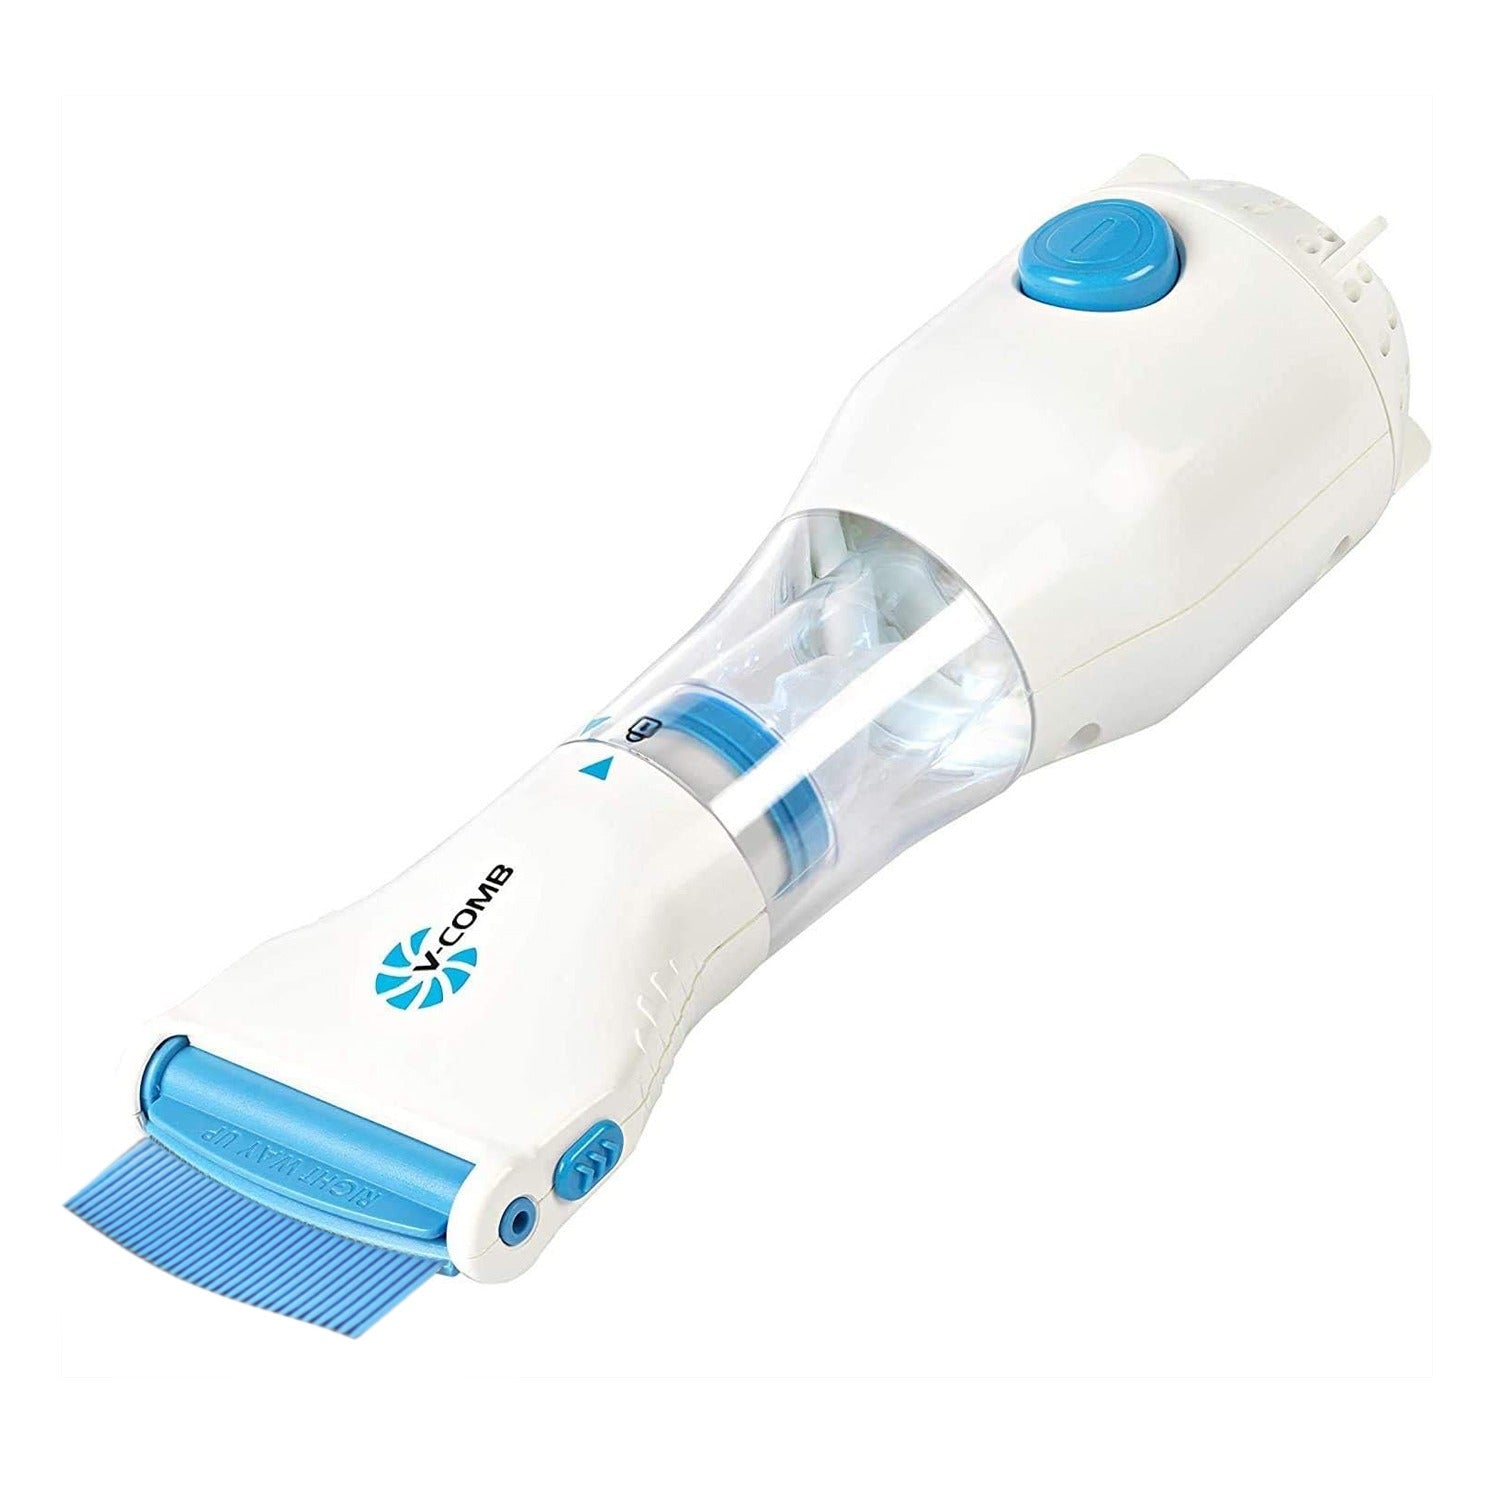 Get rid of head lice and eggs with the V-COMB Electric Lice Vacuum Remover